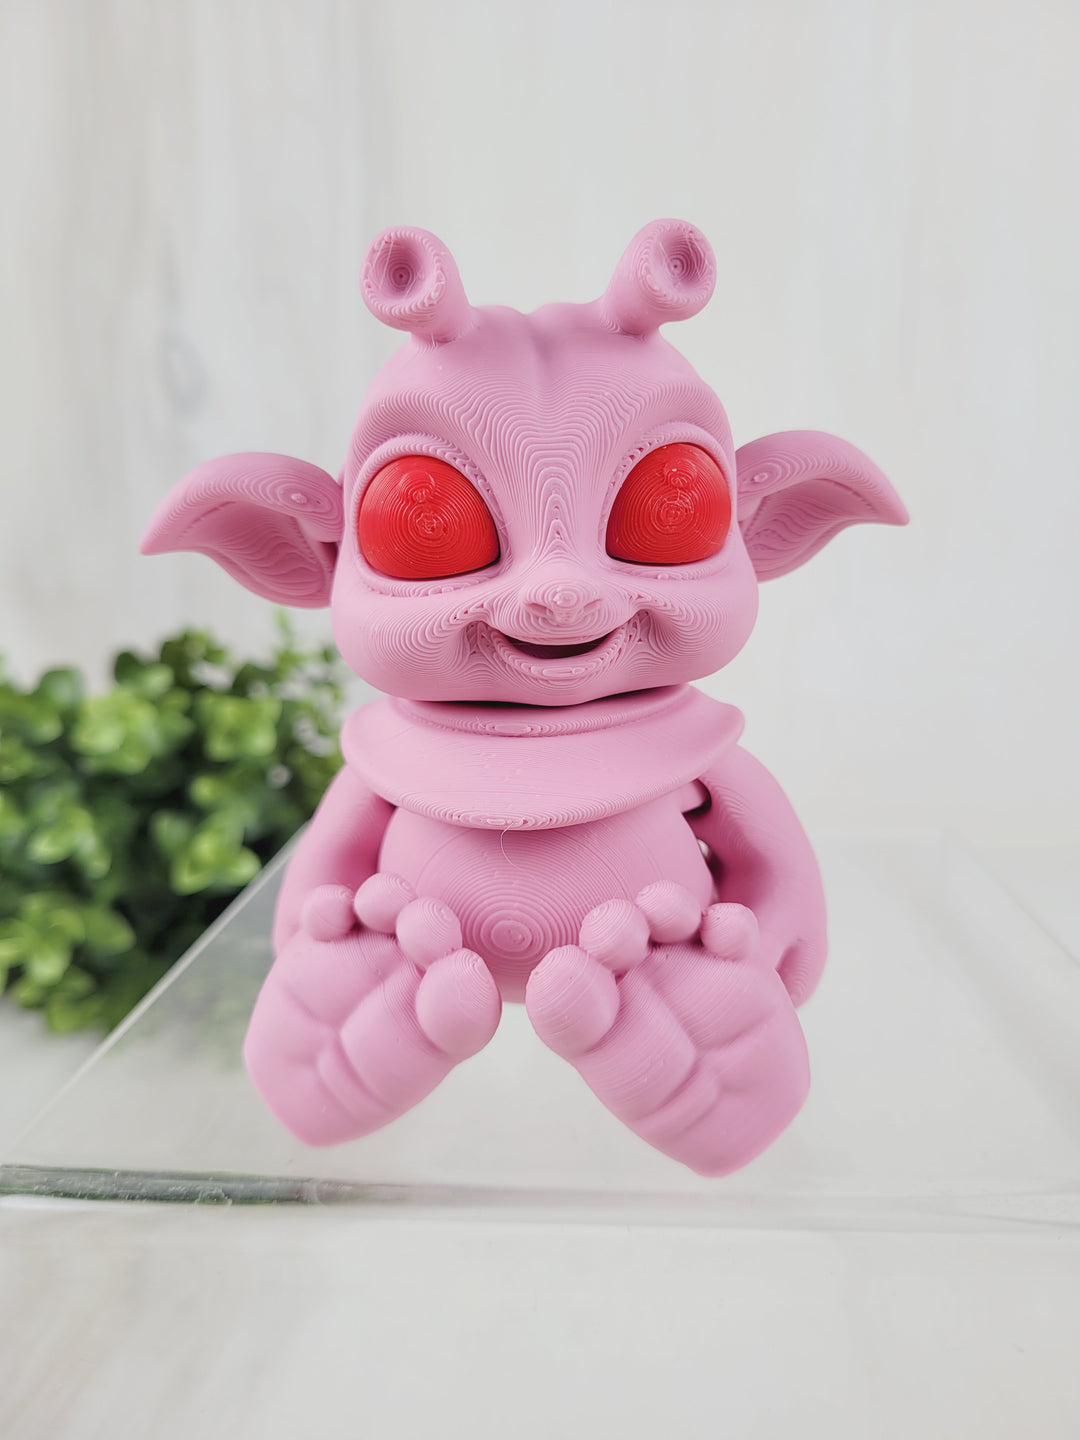 AB3D, 3D Printed Articulating Character Toys